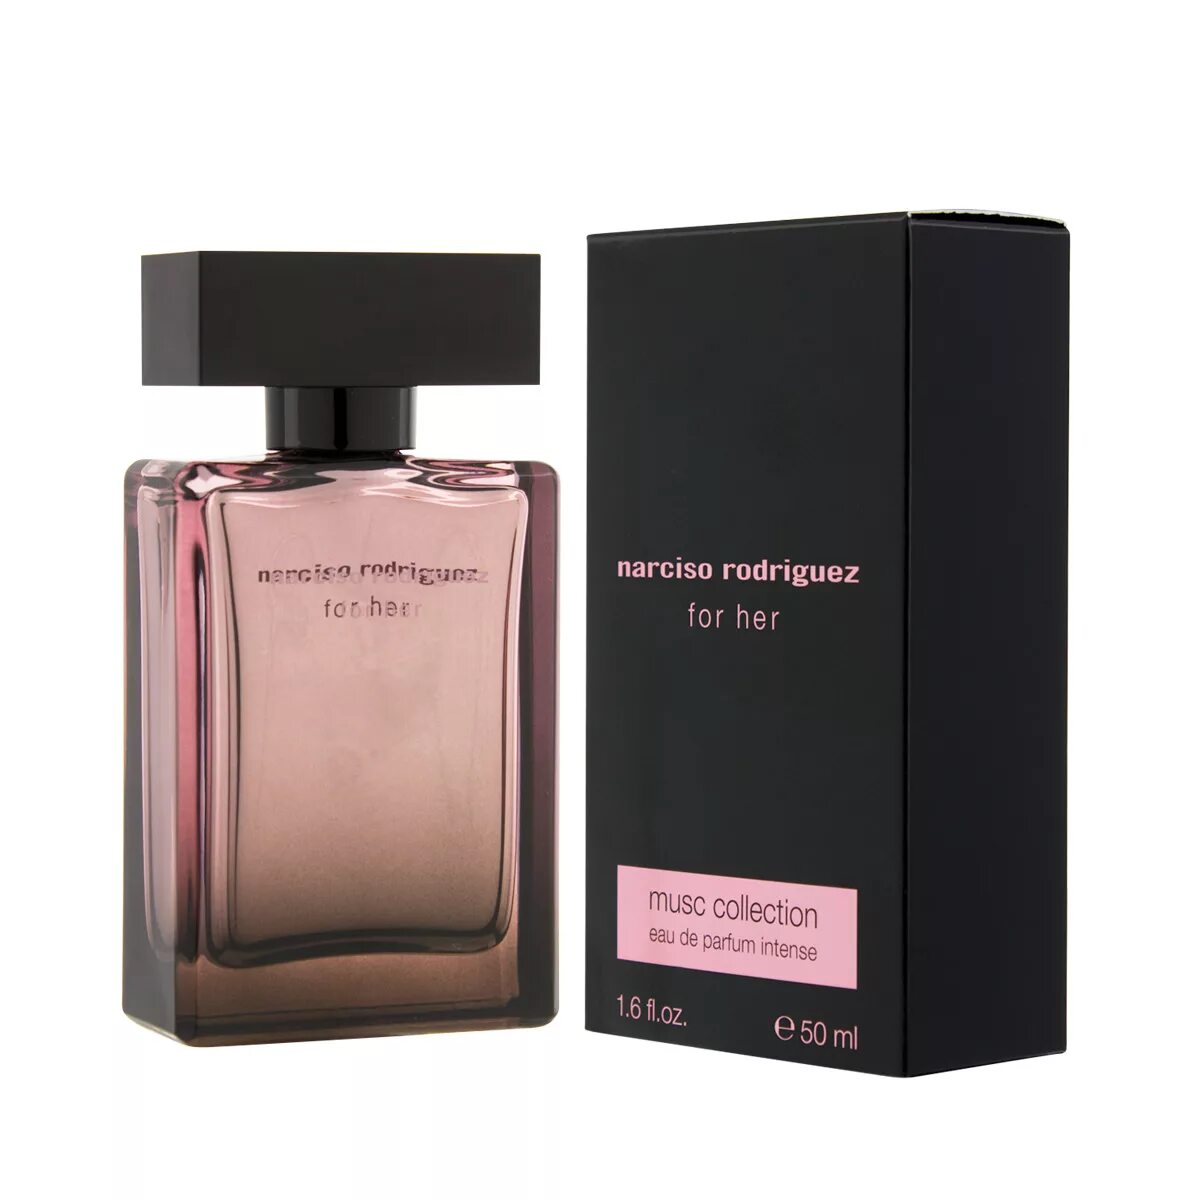 Narciso Rodriguez 50 мл for her. Narciso Rodriguez for her Musk collection. Narciso Rodriguez Musc collection intense. Narciso Rodriguez for her w EDP 50 ml [m]. Narciso rodriguez musc купить